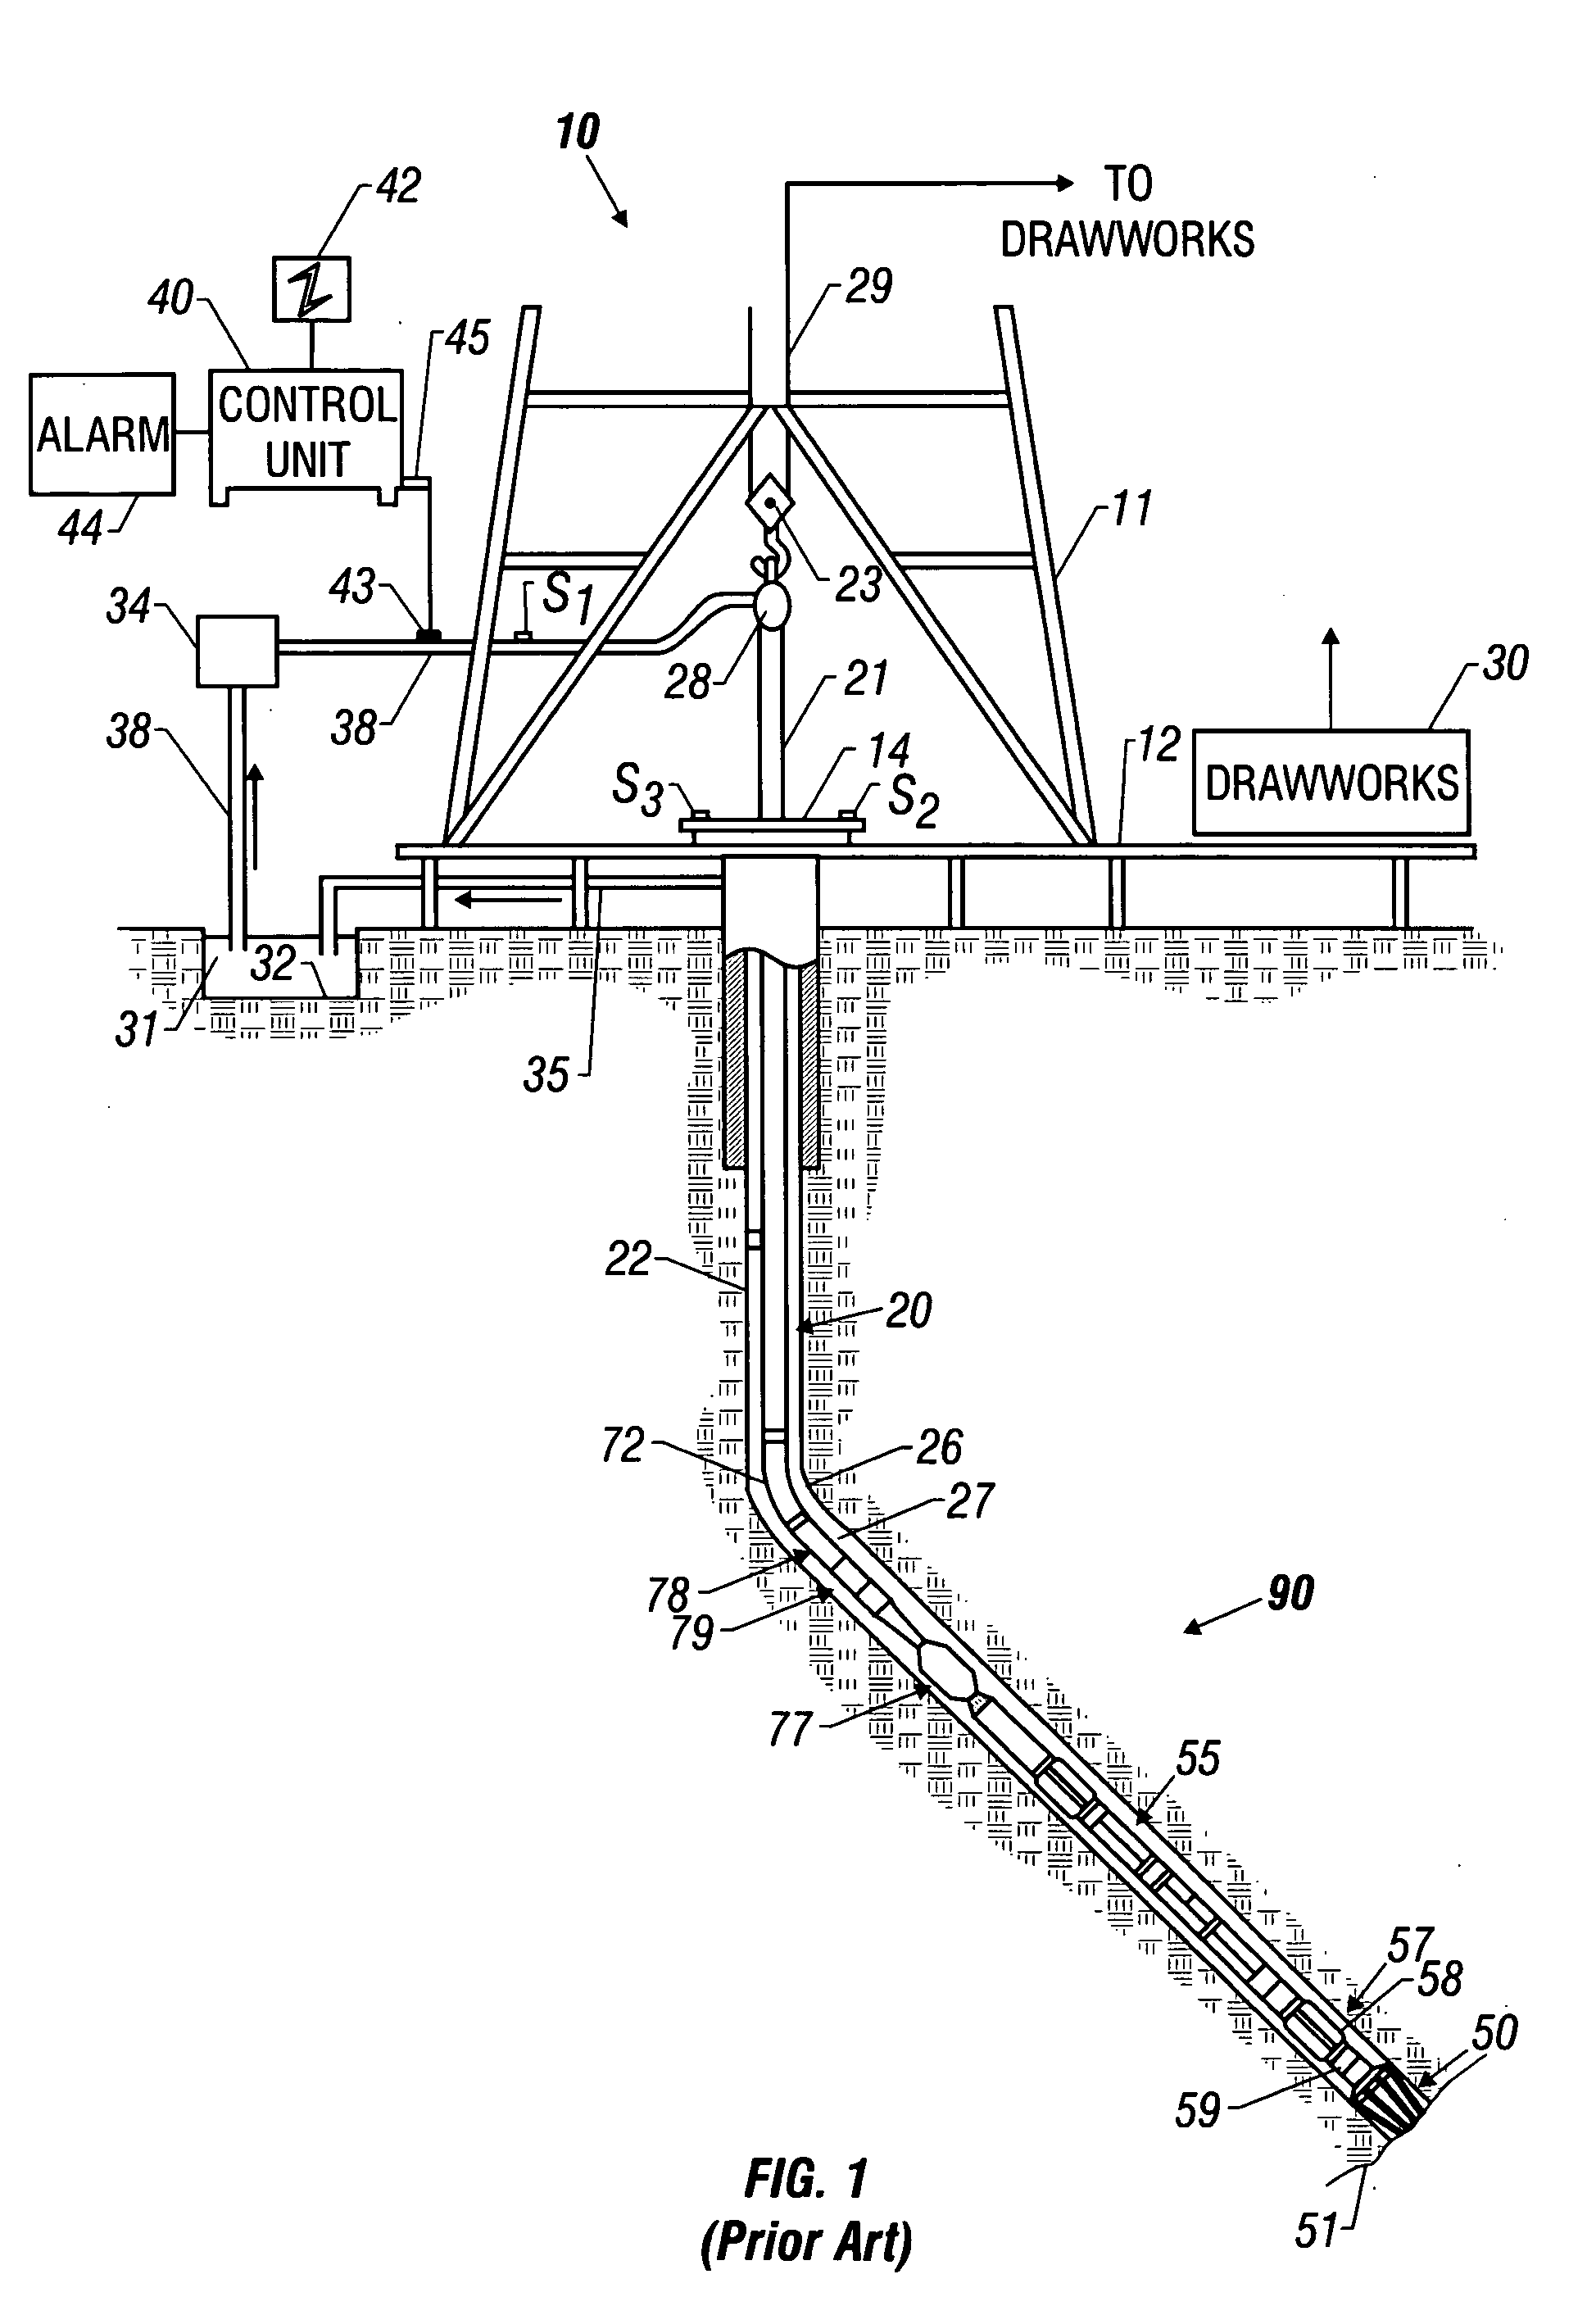 Method for determining formation porosity and gas saturation in a gas reservoir